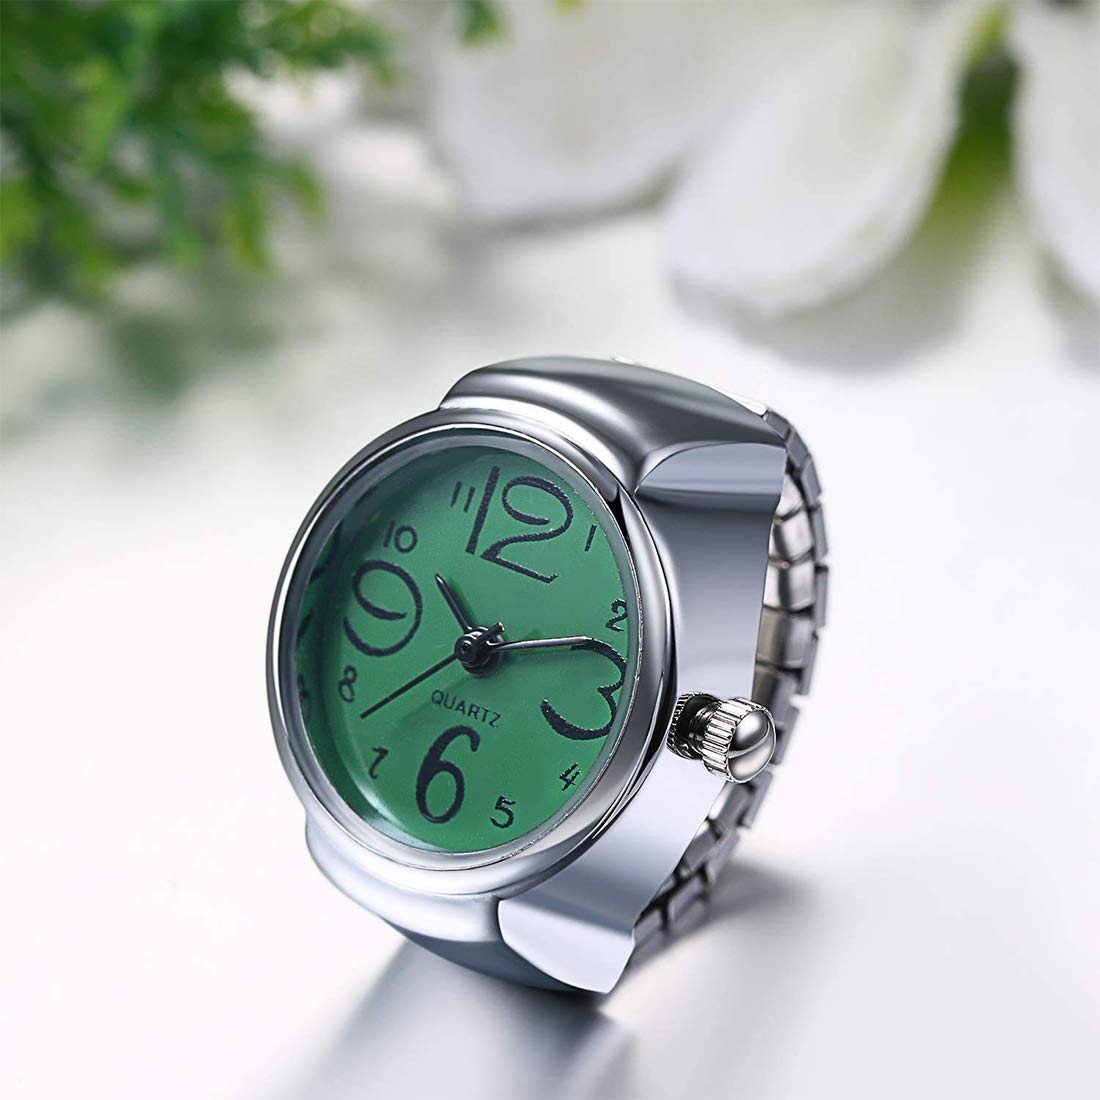 Vintage Couples Adjustable Quartz Ring Watch Ring Creative Punk Style With  Pointer Design, Elastic Finger Ring For Men And Women Perfect Gift For  Jewelry Lovers From Vivian5168, $1.63 | DHgate.Com